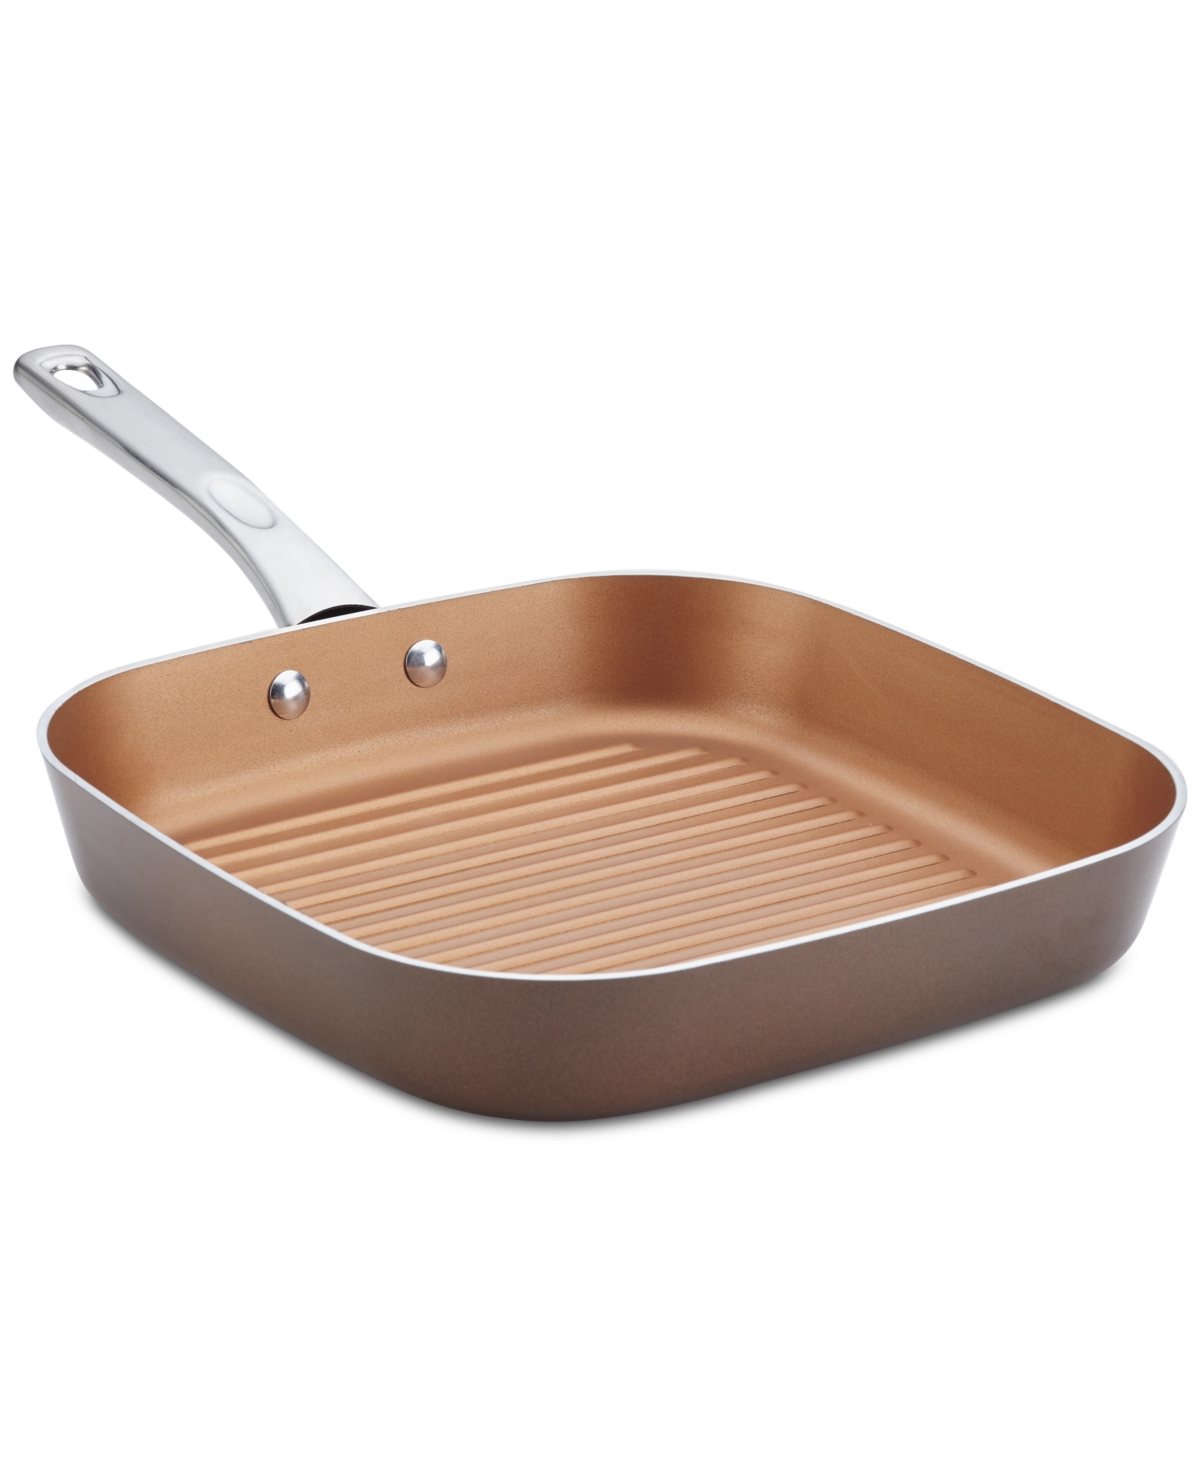 Ayesha Curry 11.25 Porcelain Enamel Deep Square Grill Pan